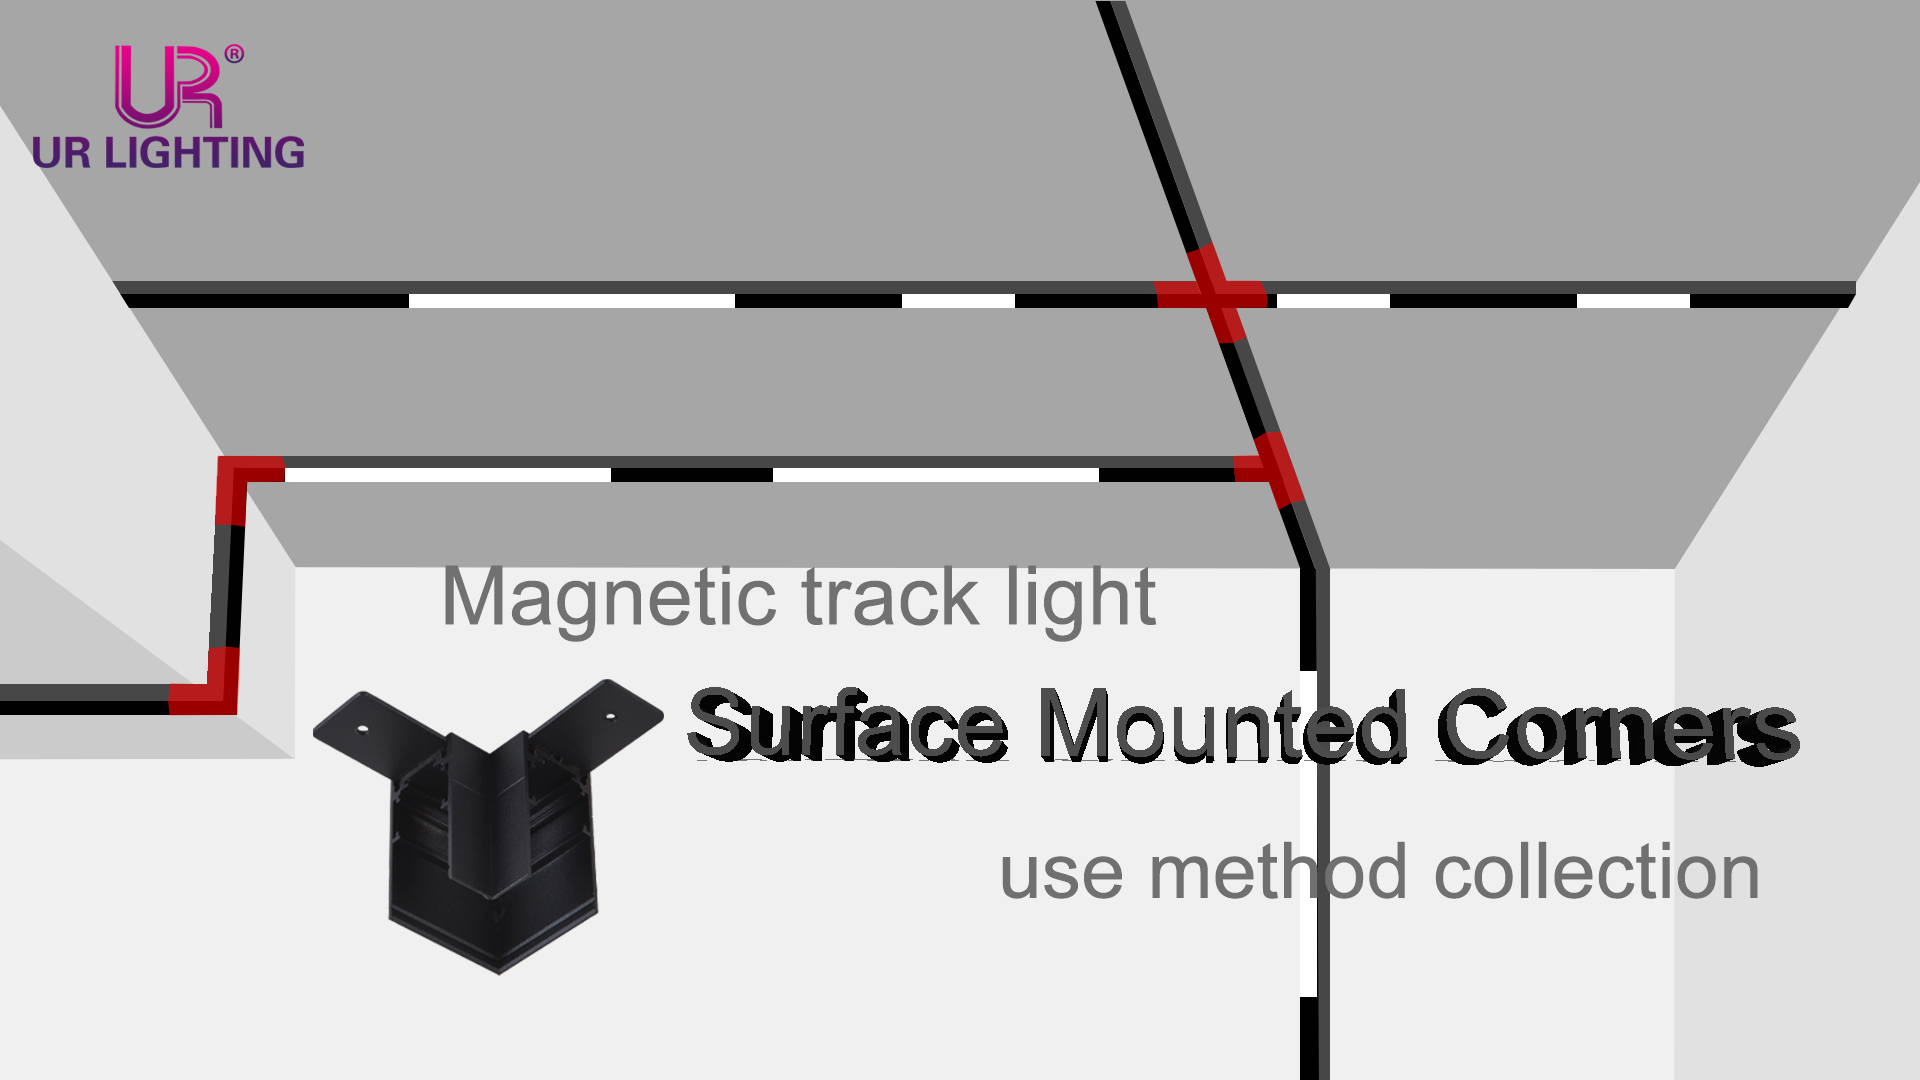 Magnetic track light surface mounted corners